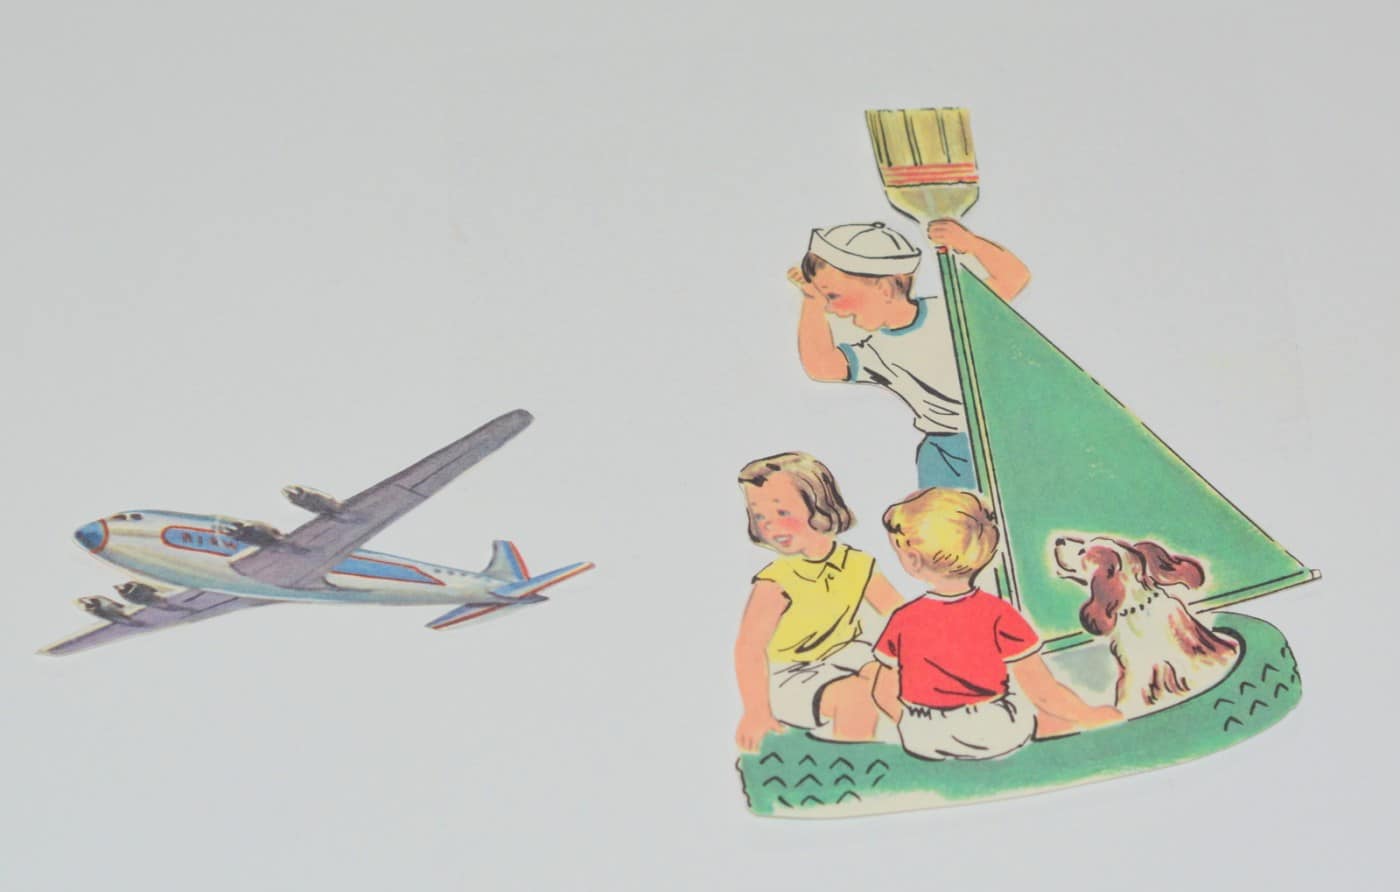 Shapes of a plane and children in a boat cut out